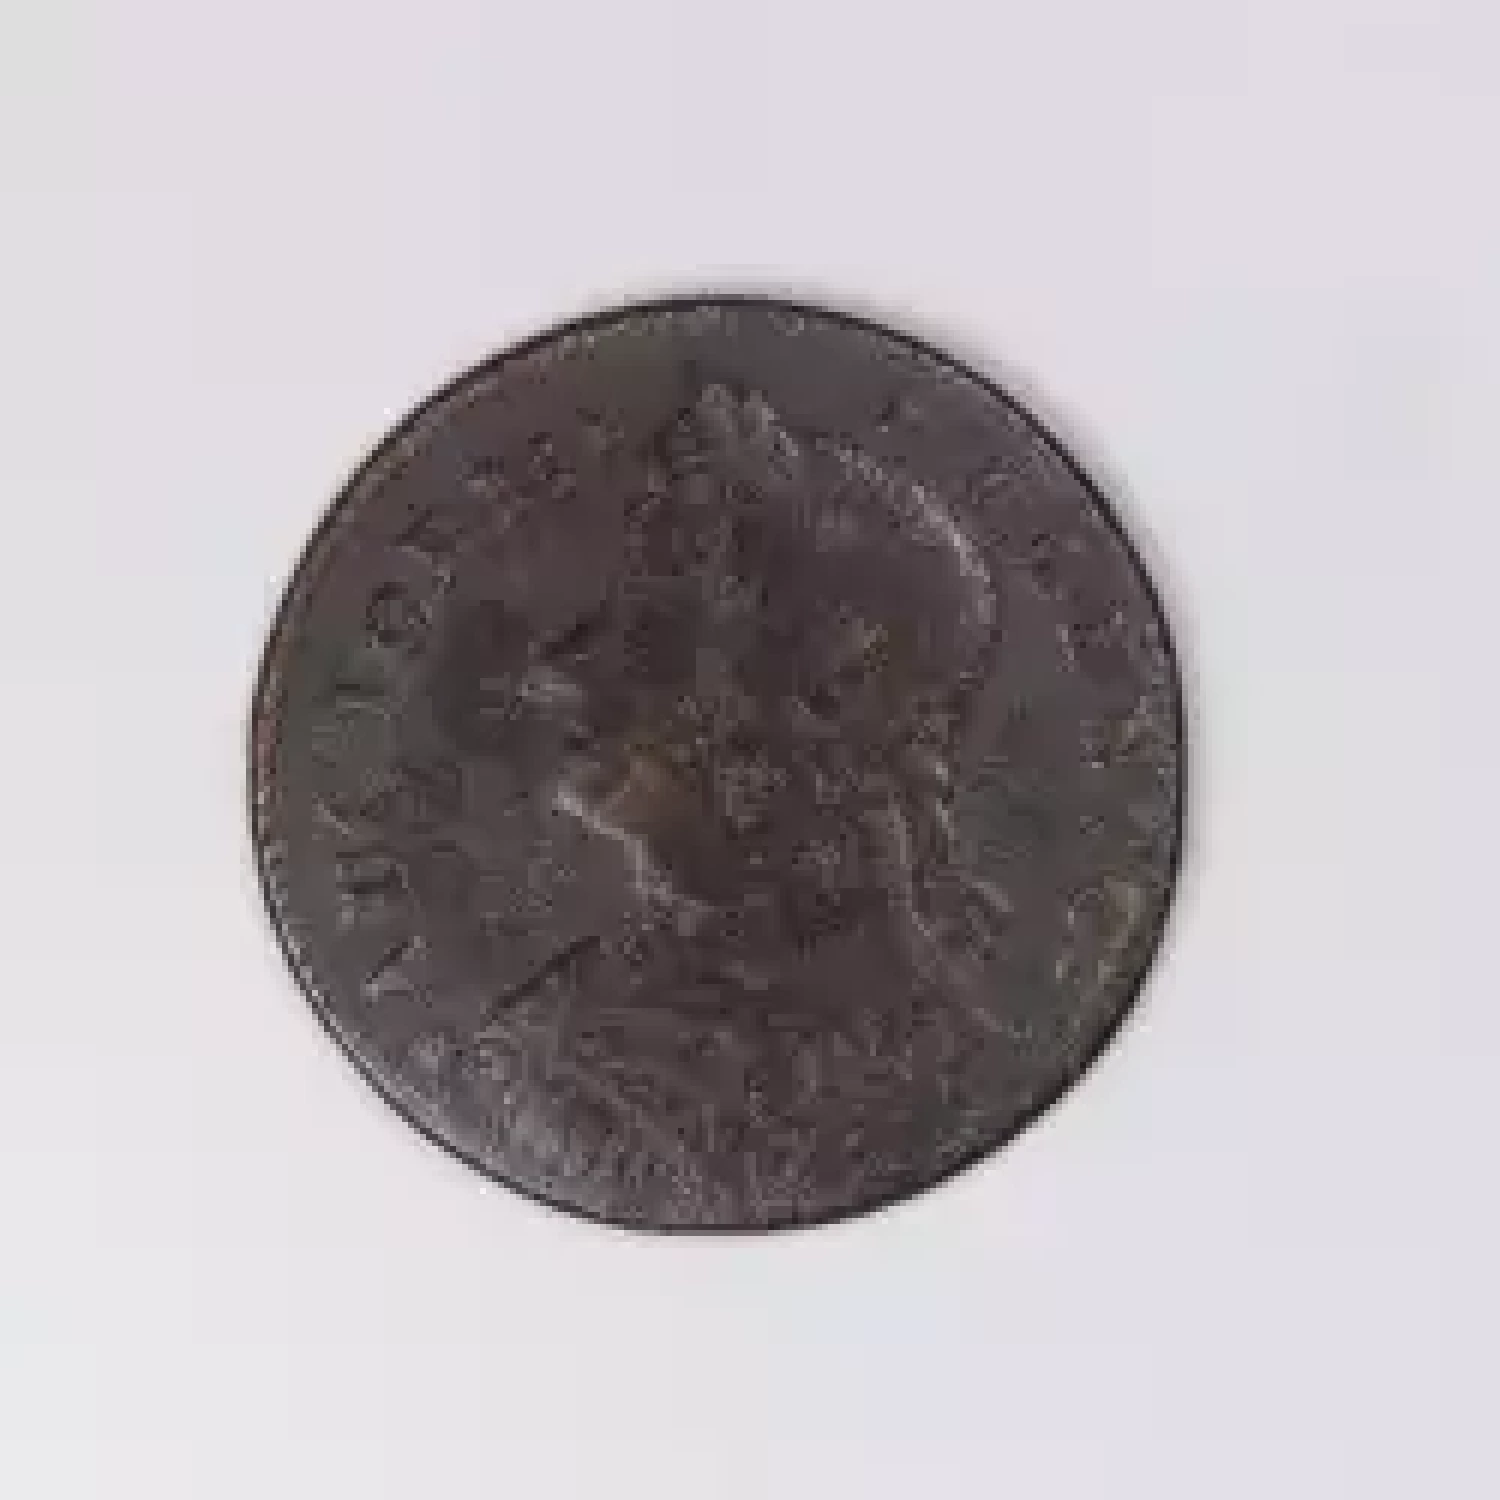 Post Colonial Issues -Coinage of the States-Connecticut -copper